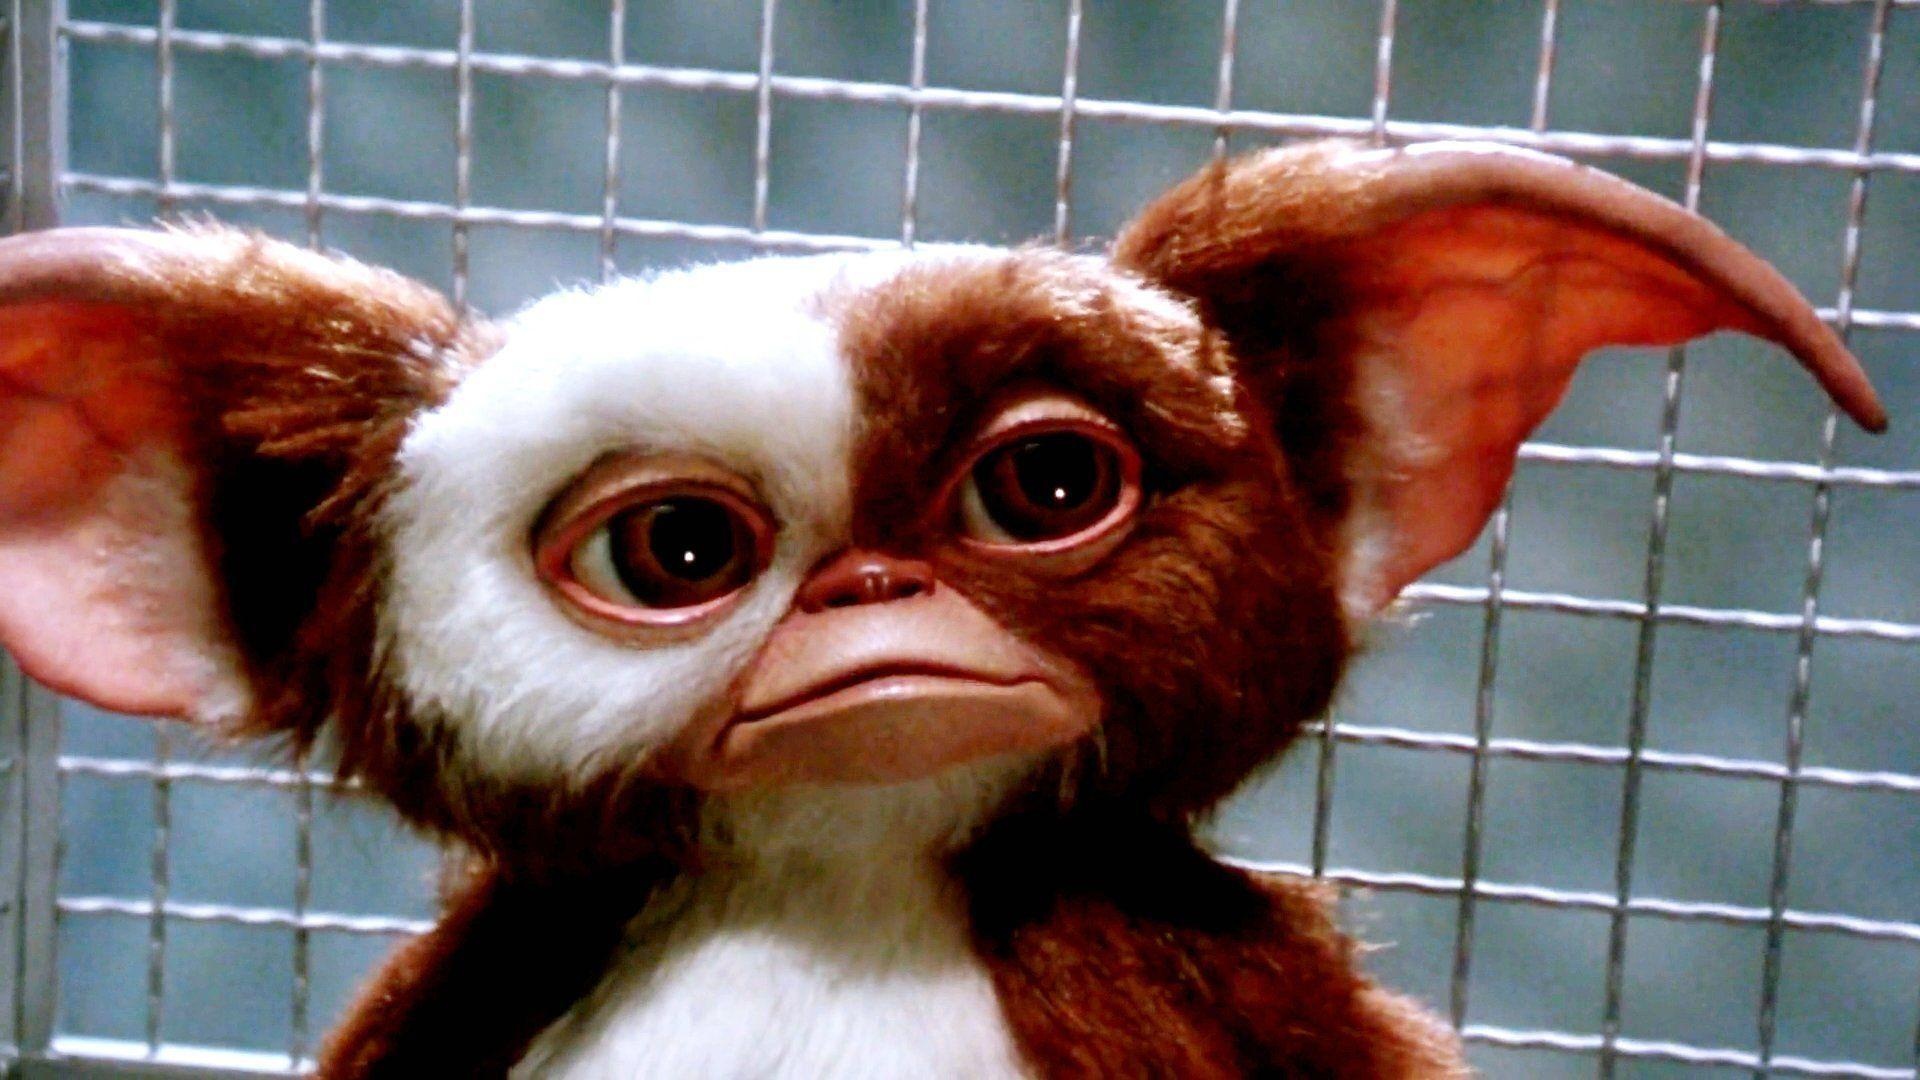 Gremlin Gizmo: Howie Mandel has provided the voice of the creature in the movie. 1920x1080 Full HD Wallpaper.